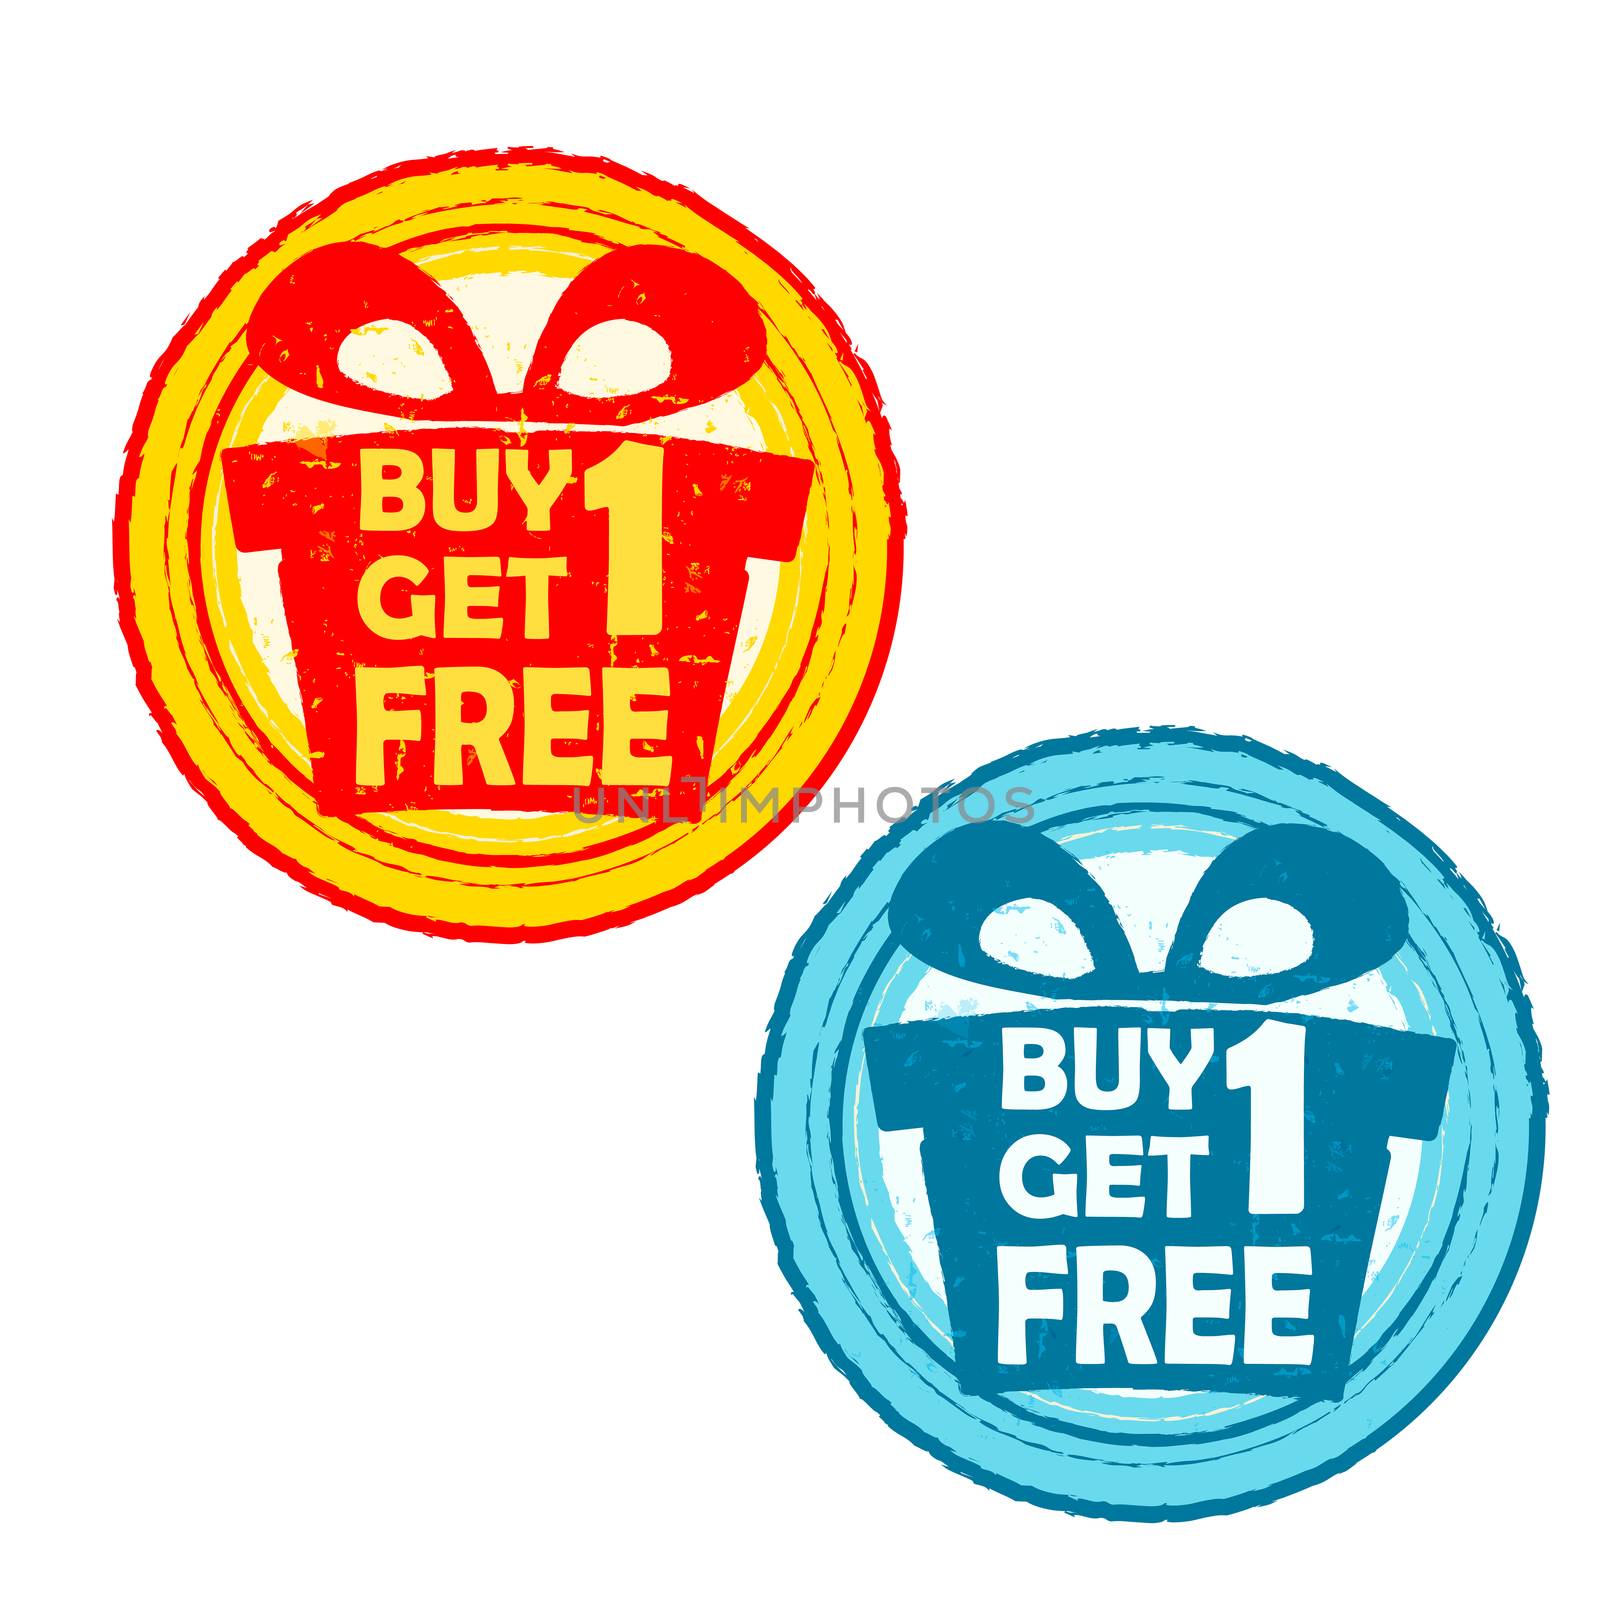 buy one get one free with gift signs - text in yellow red and blue drawn label with present box symbols, business shopping concept